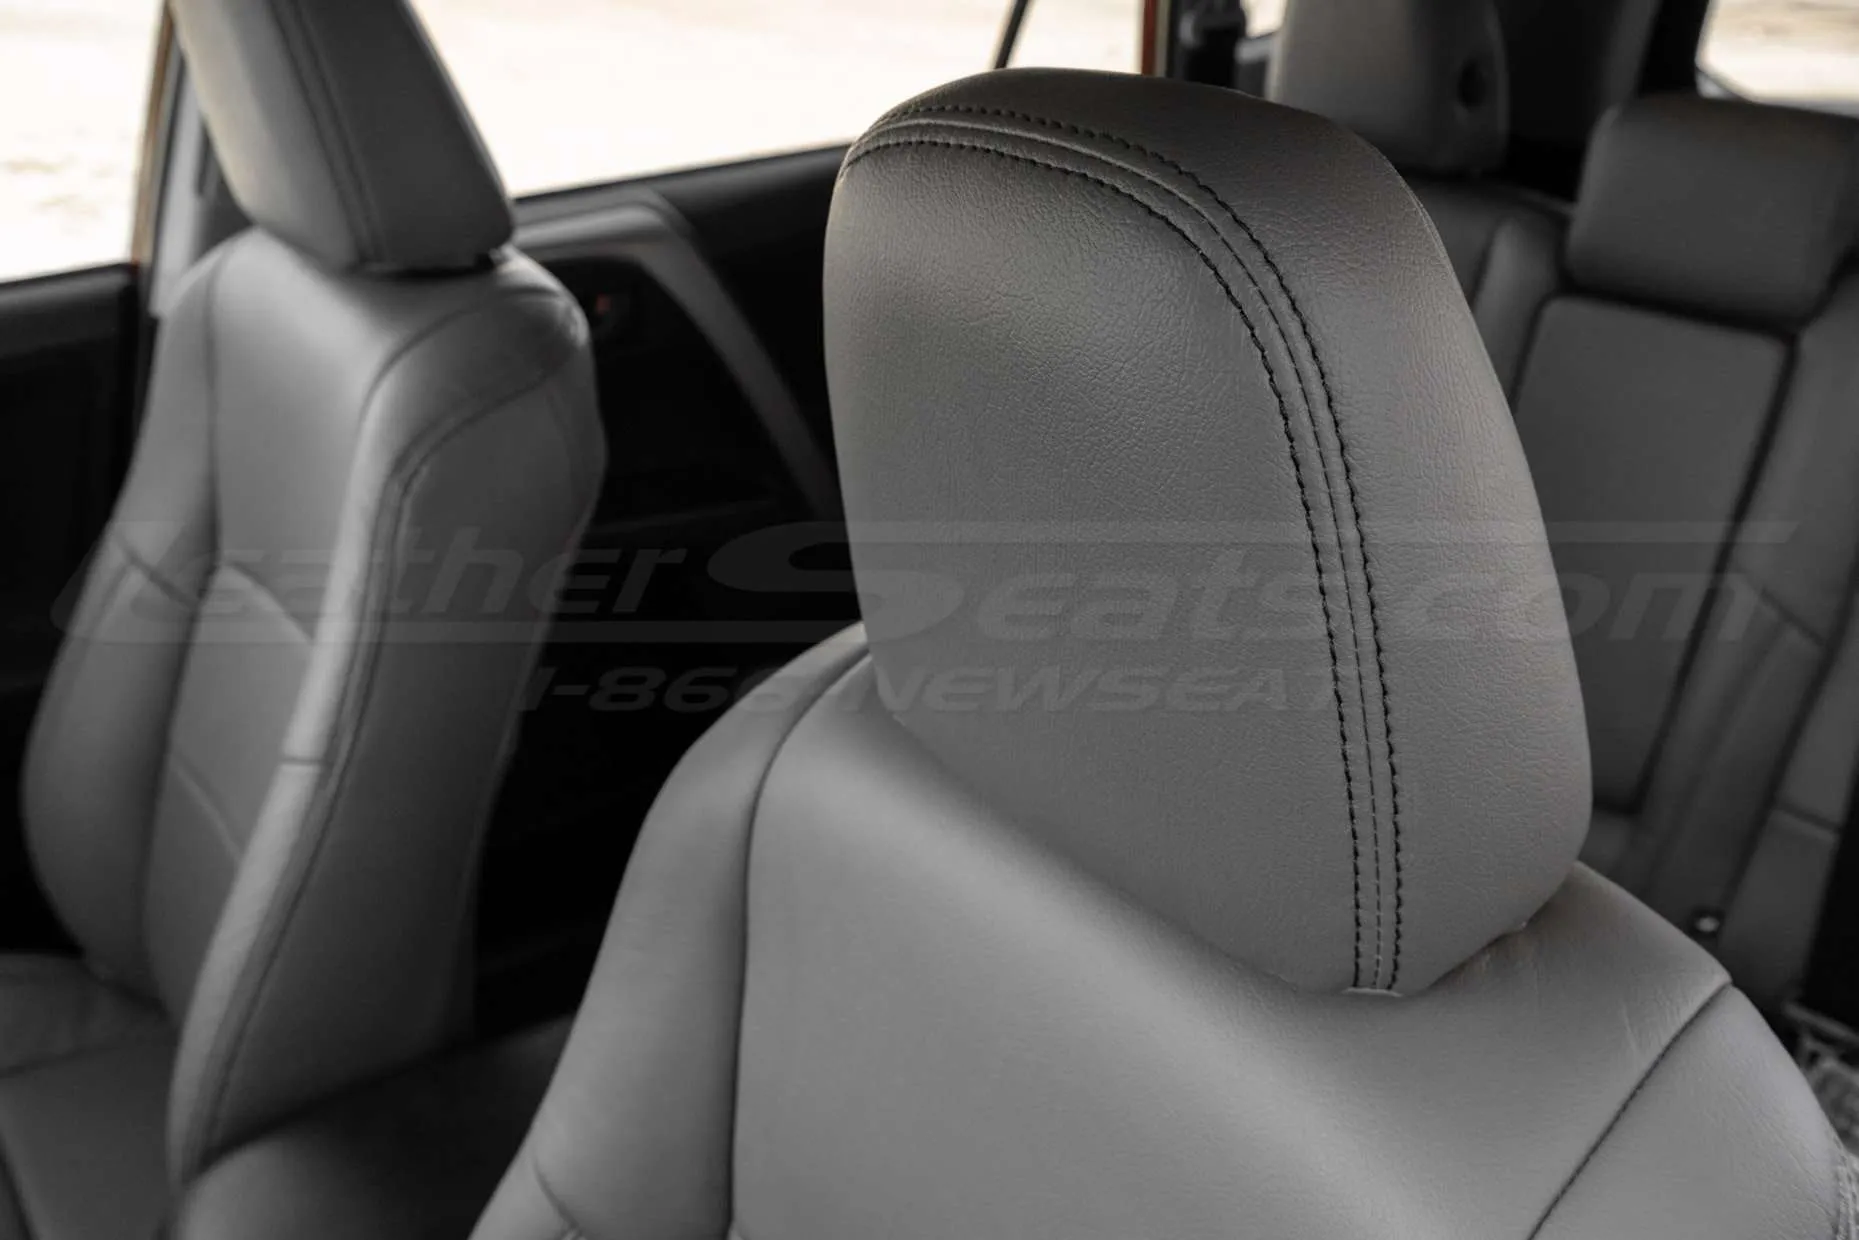 Leather headrest close-up with contrasting double-stitching in Black